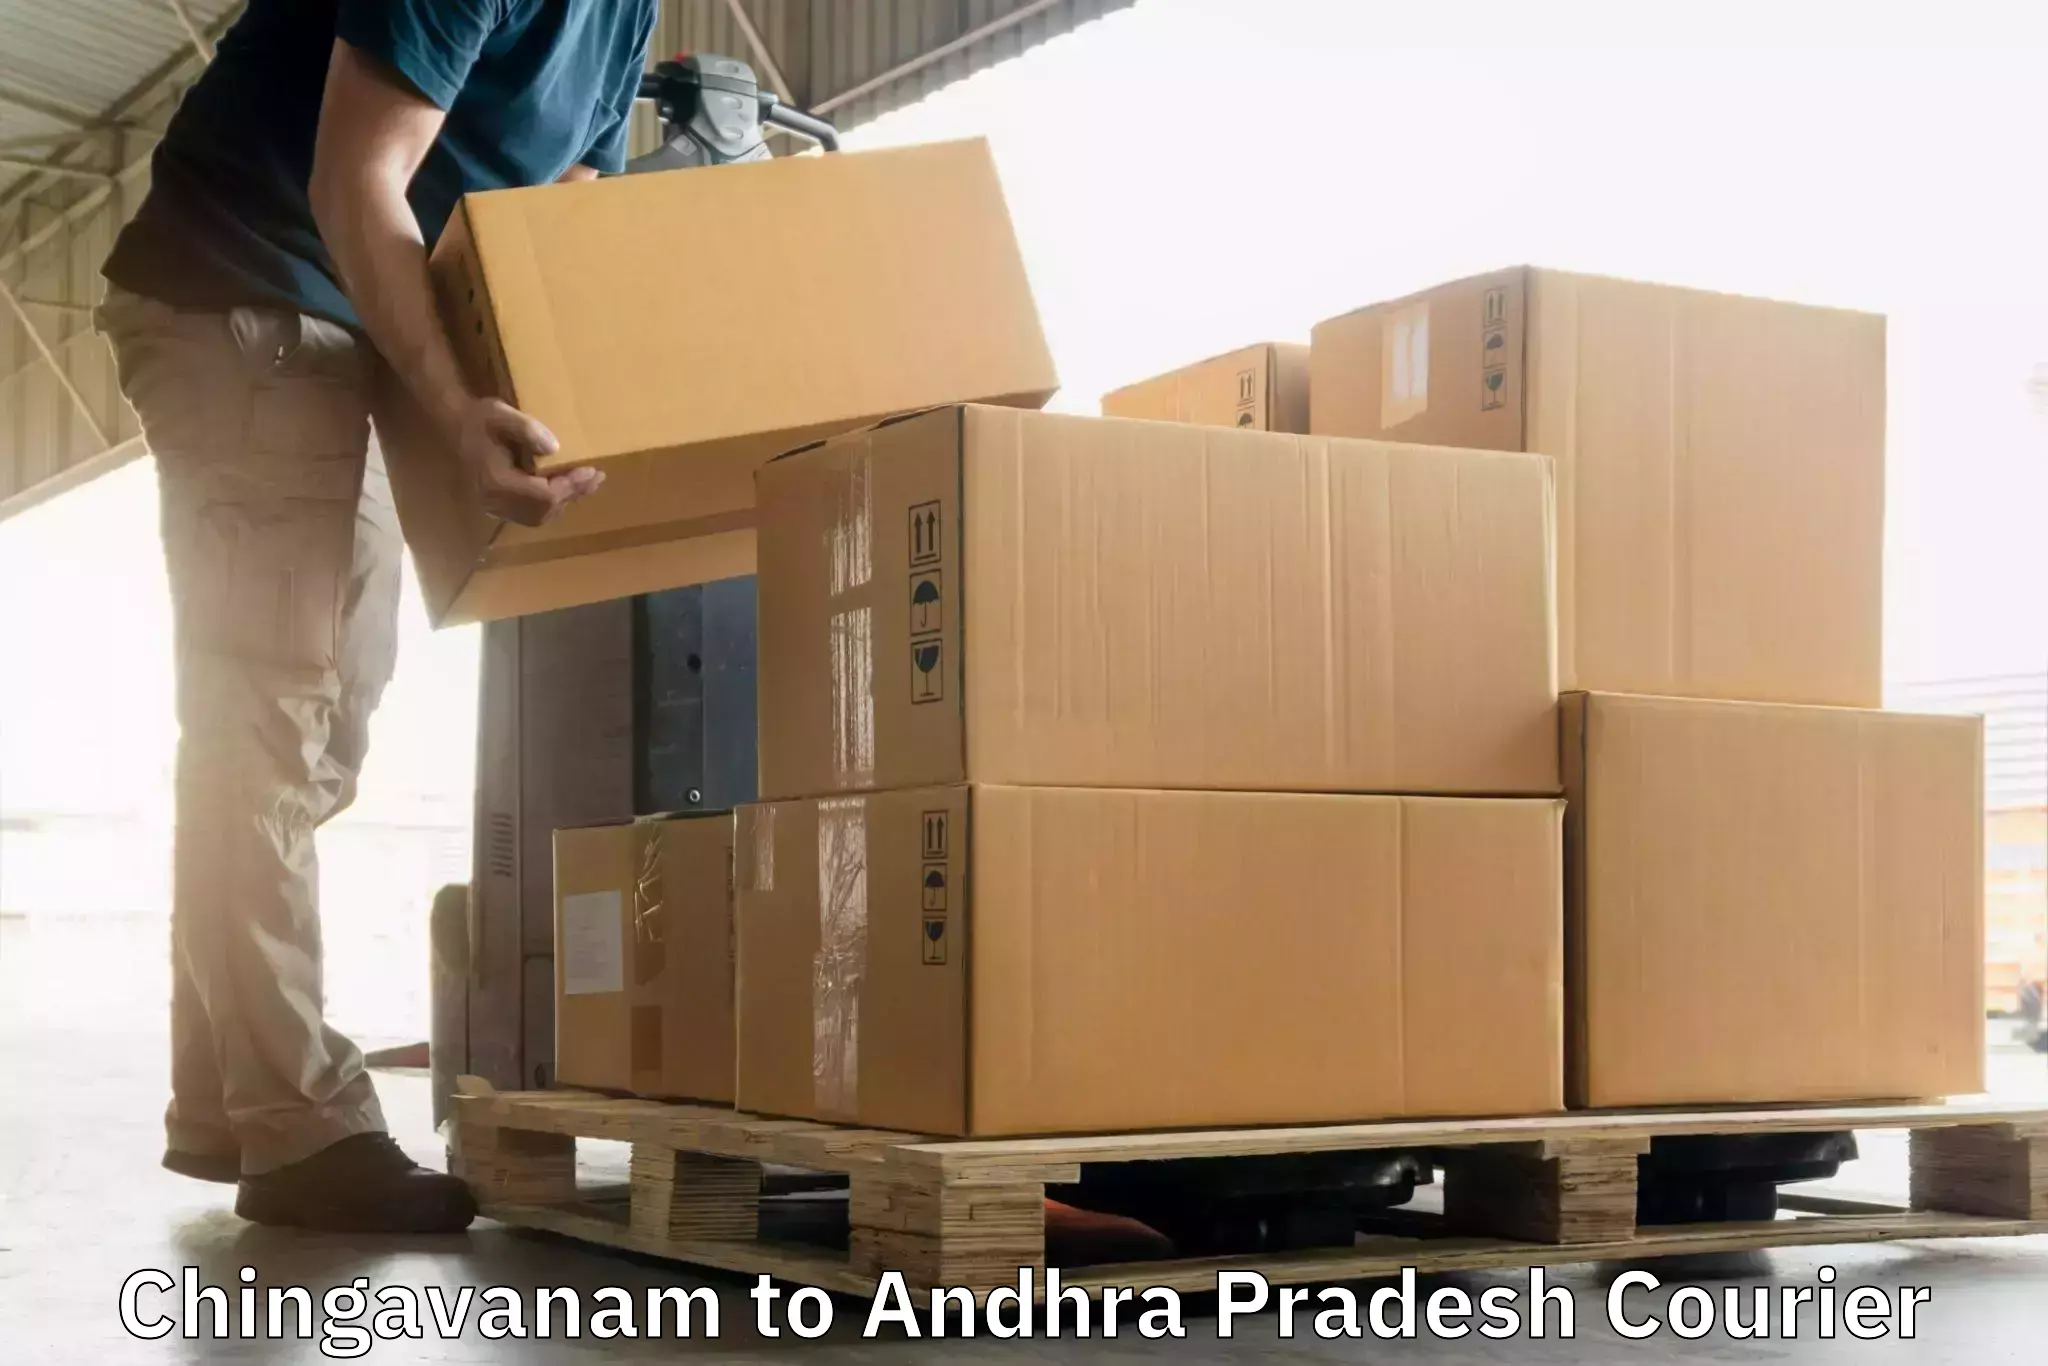 Reliable delivery network Chingavanam to Andhra Pradesh